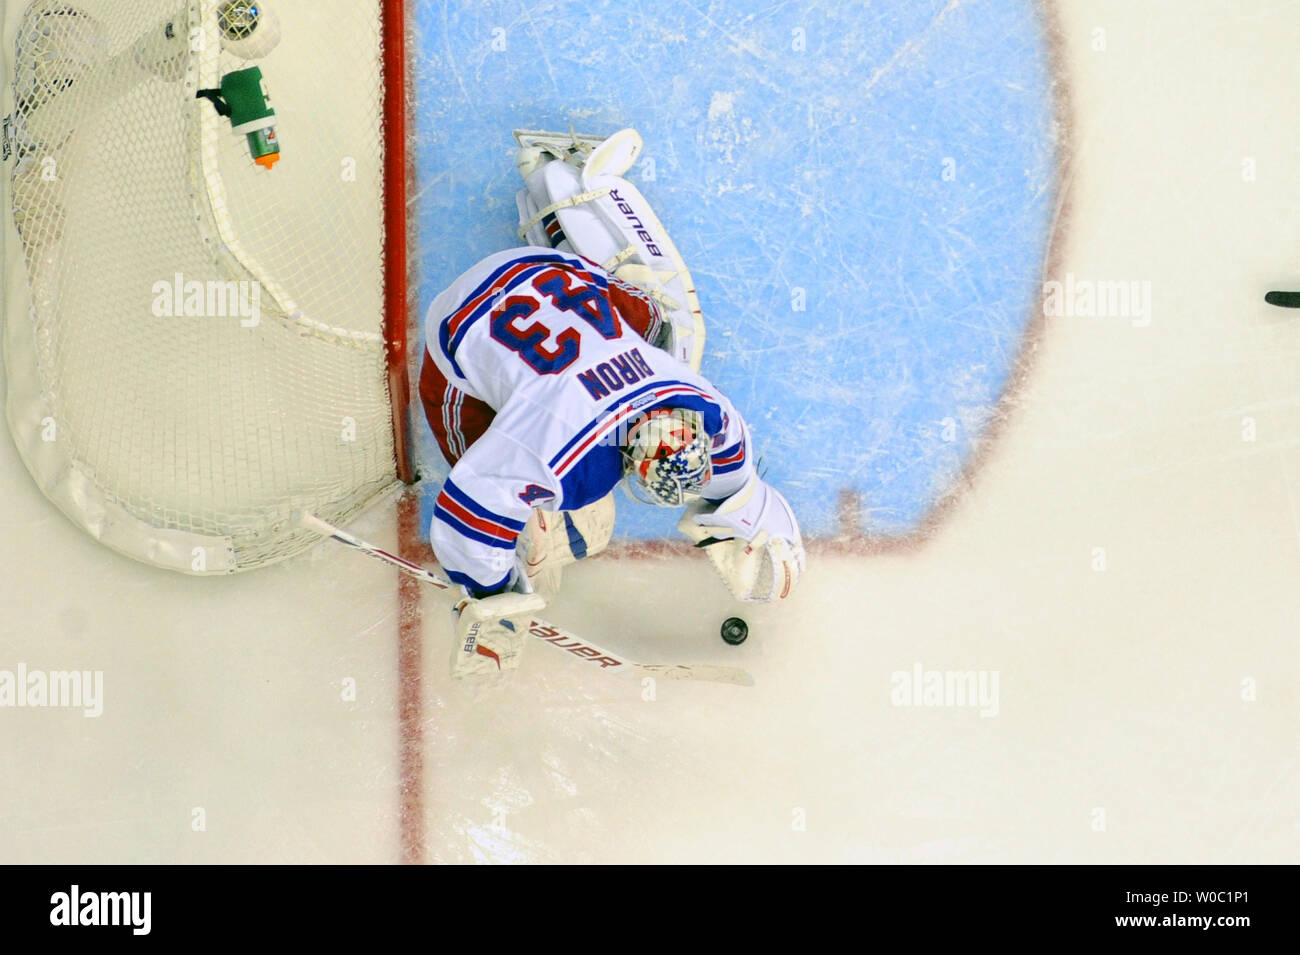 Martin Biron in net for Rangers today in Montreal – New York Daily